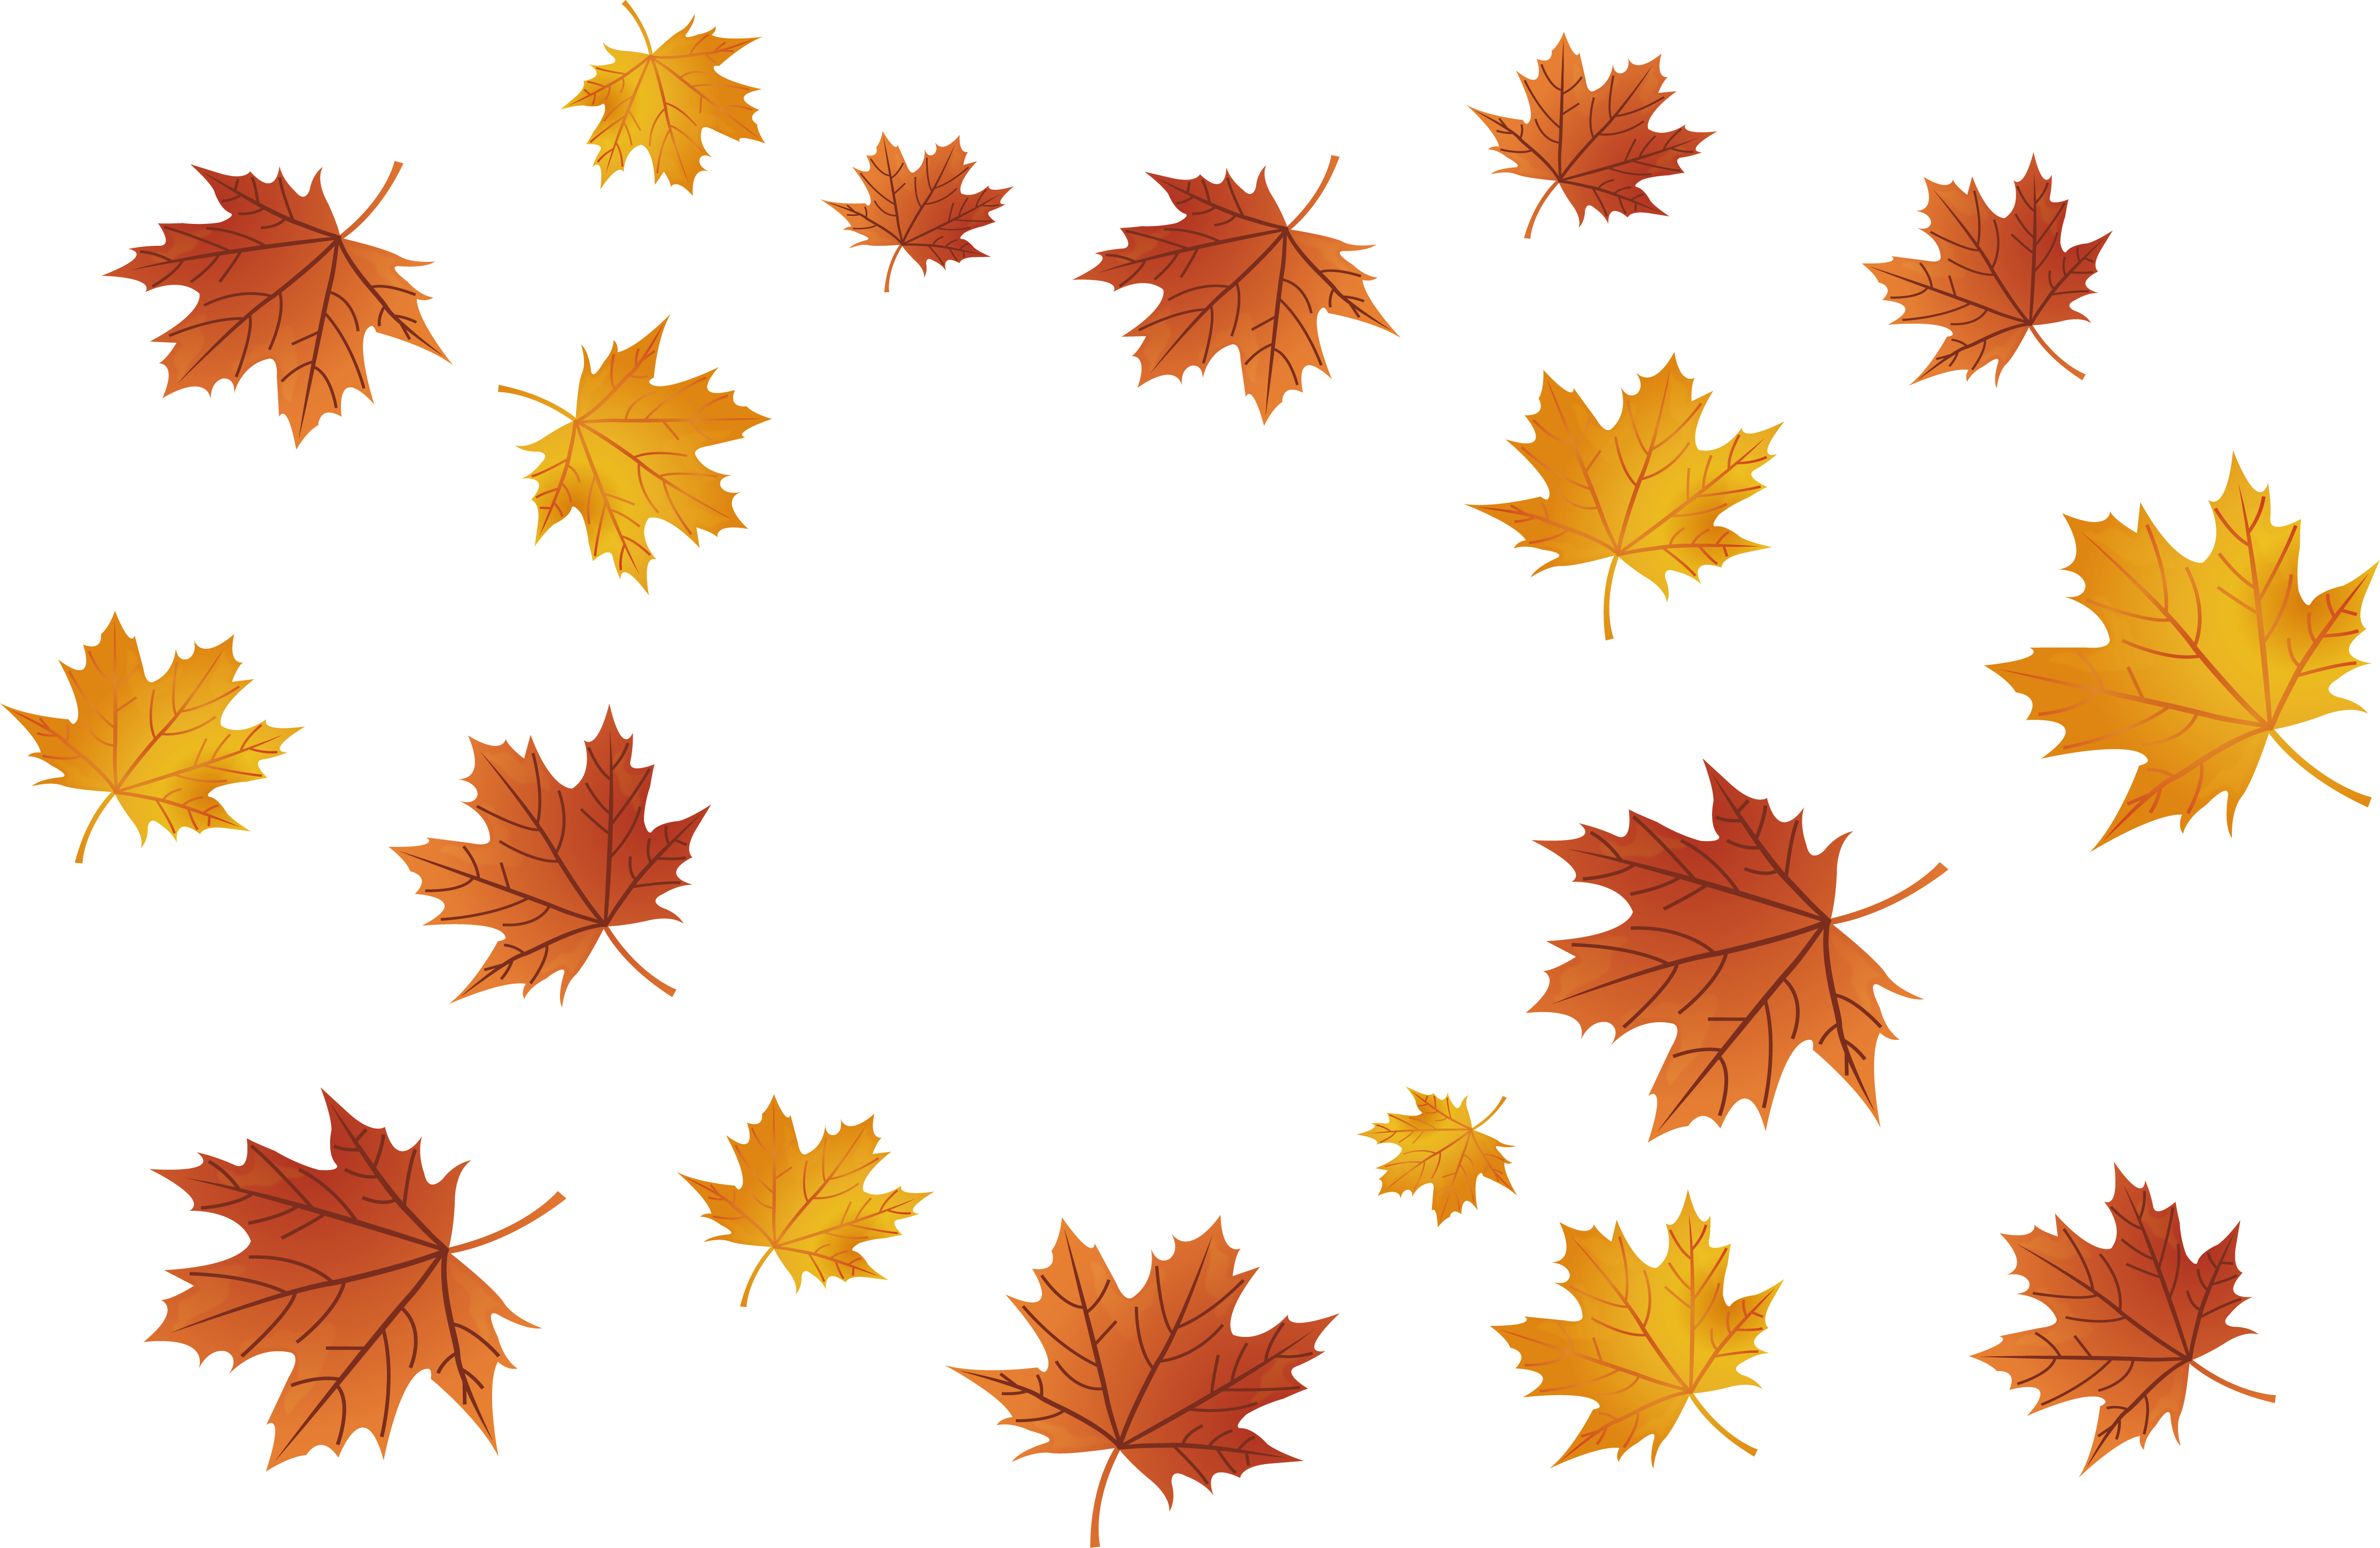 Maple Leaf Falling PNG Images Transparent Background | PNG Play